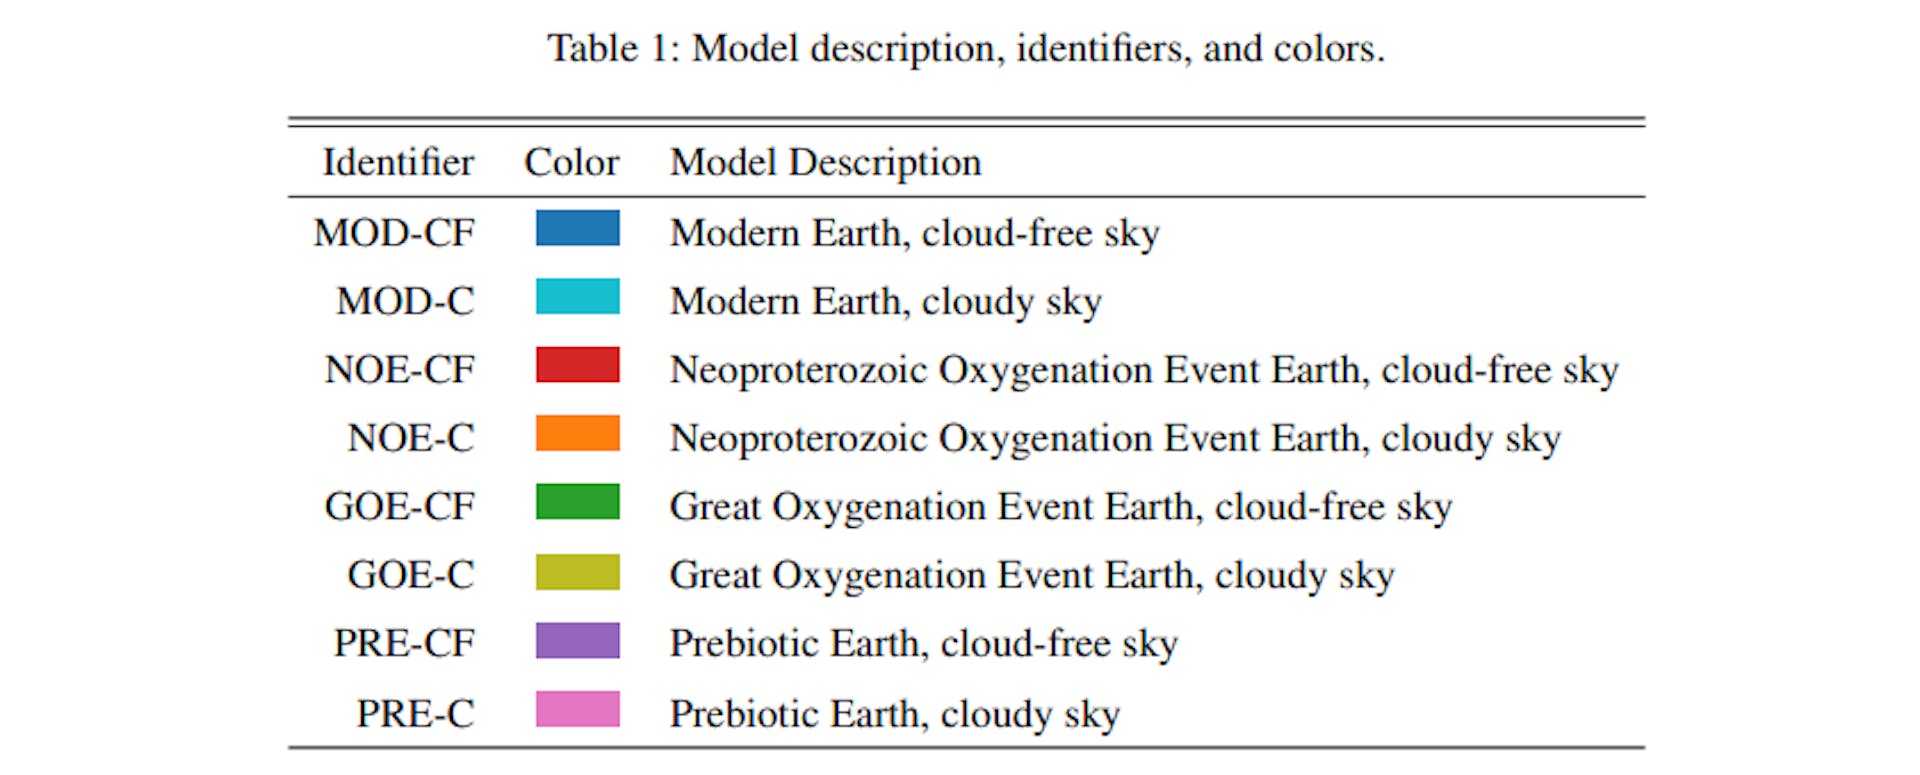 Notes. The identifier "CF" denotes "cloud-free" (meaning "clear sky"). The identifier "C" denotes "cloudy". See main text for details.